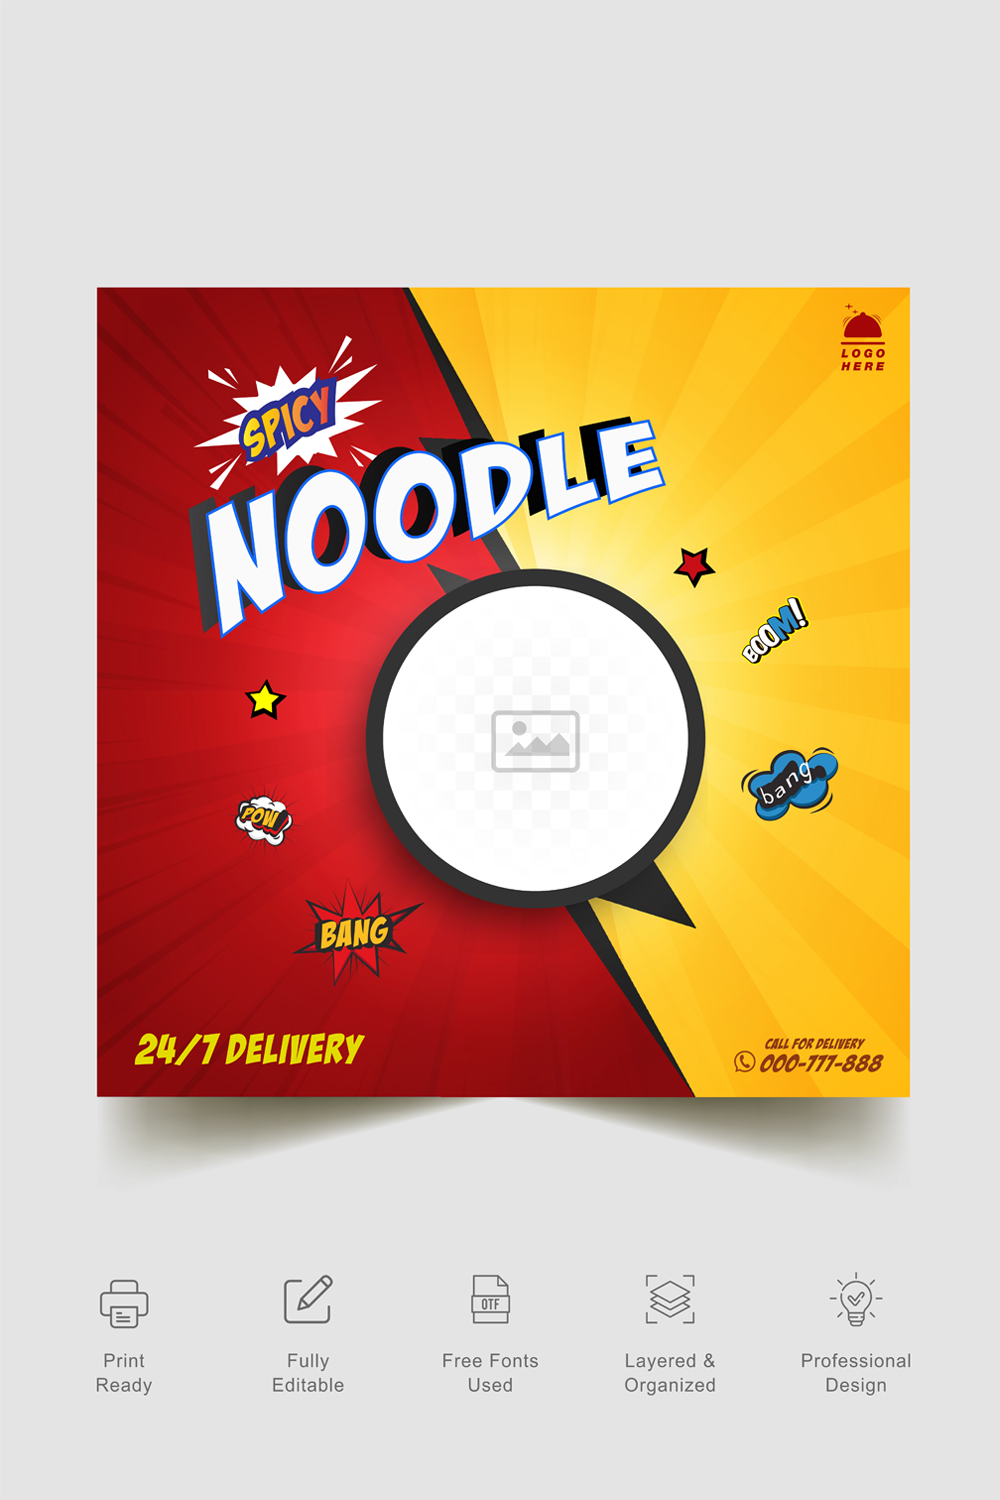 Spicy noodles template for social media promotion pinterest preview image.